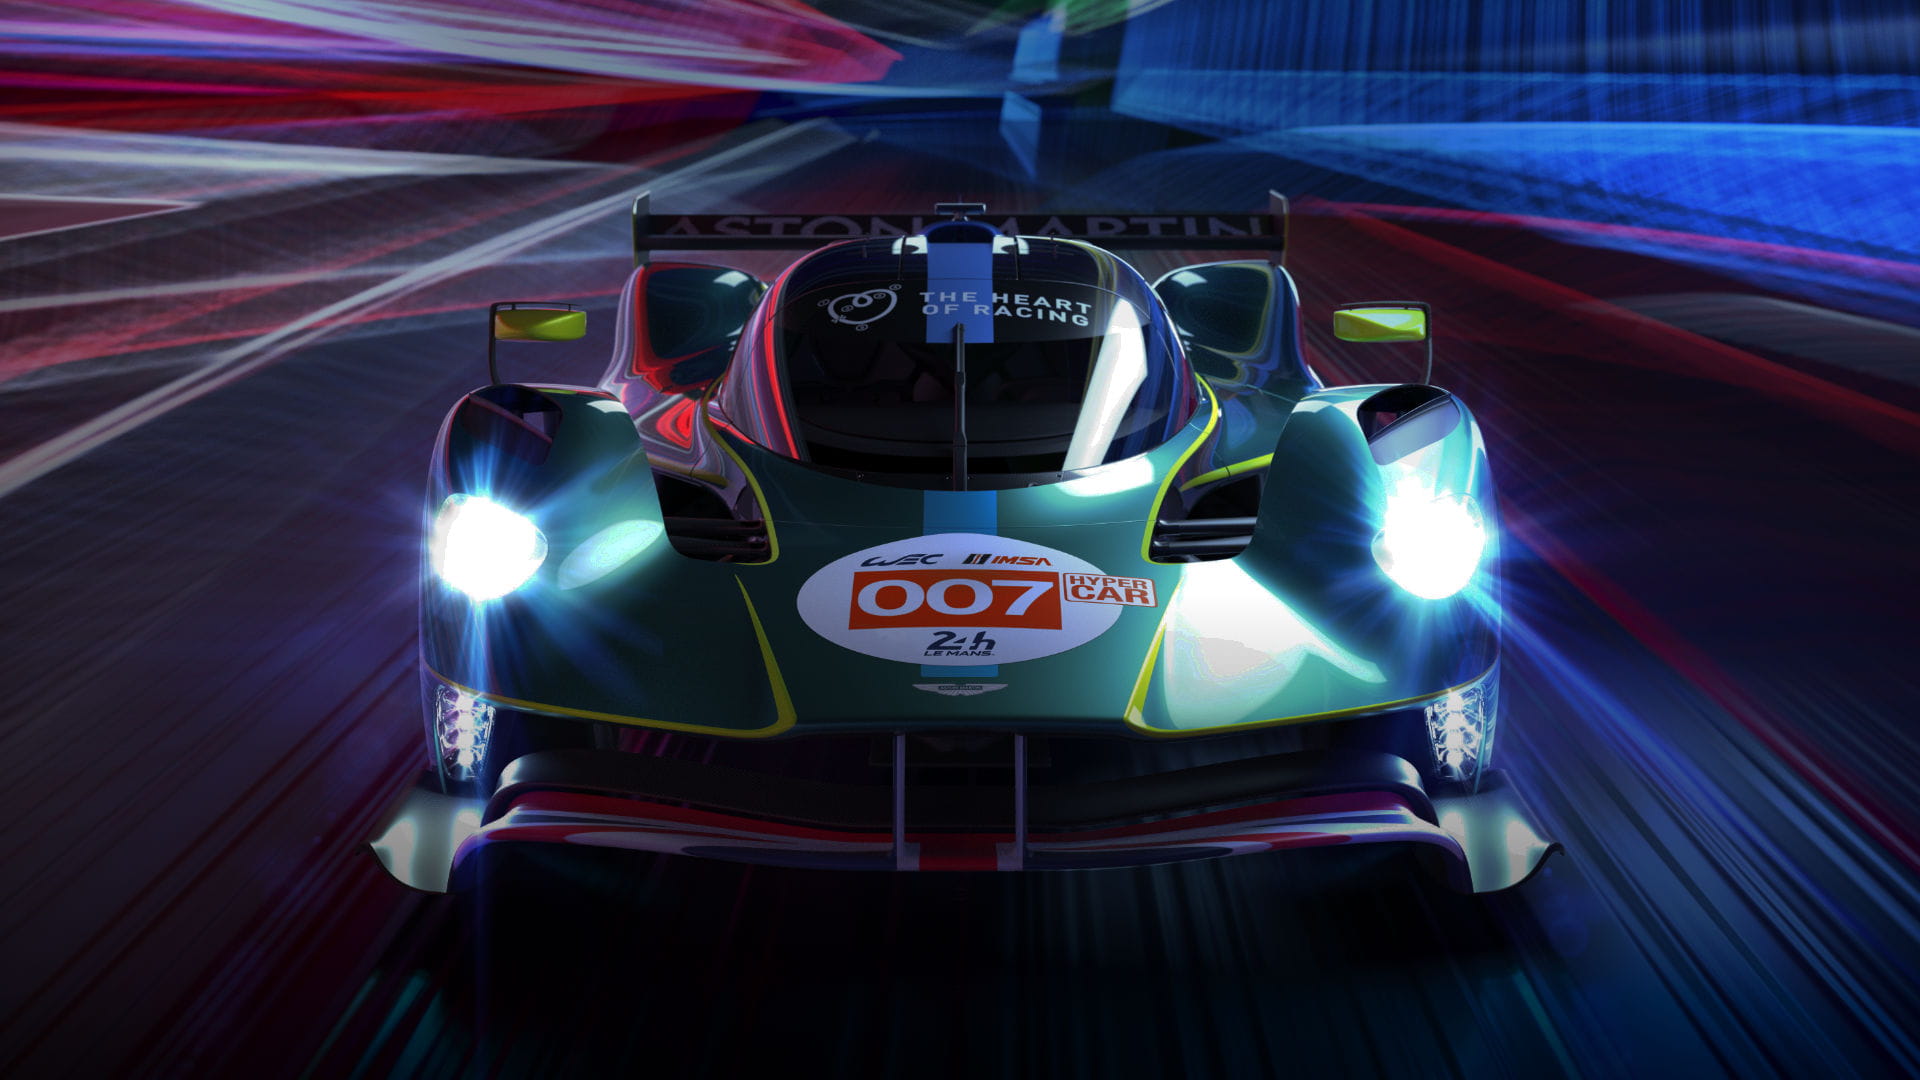 Valkyrie Hypercar at 24 Hours of Le Mans